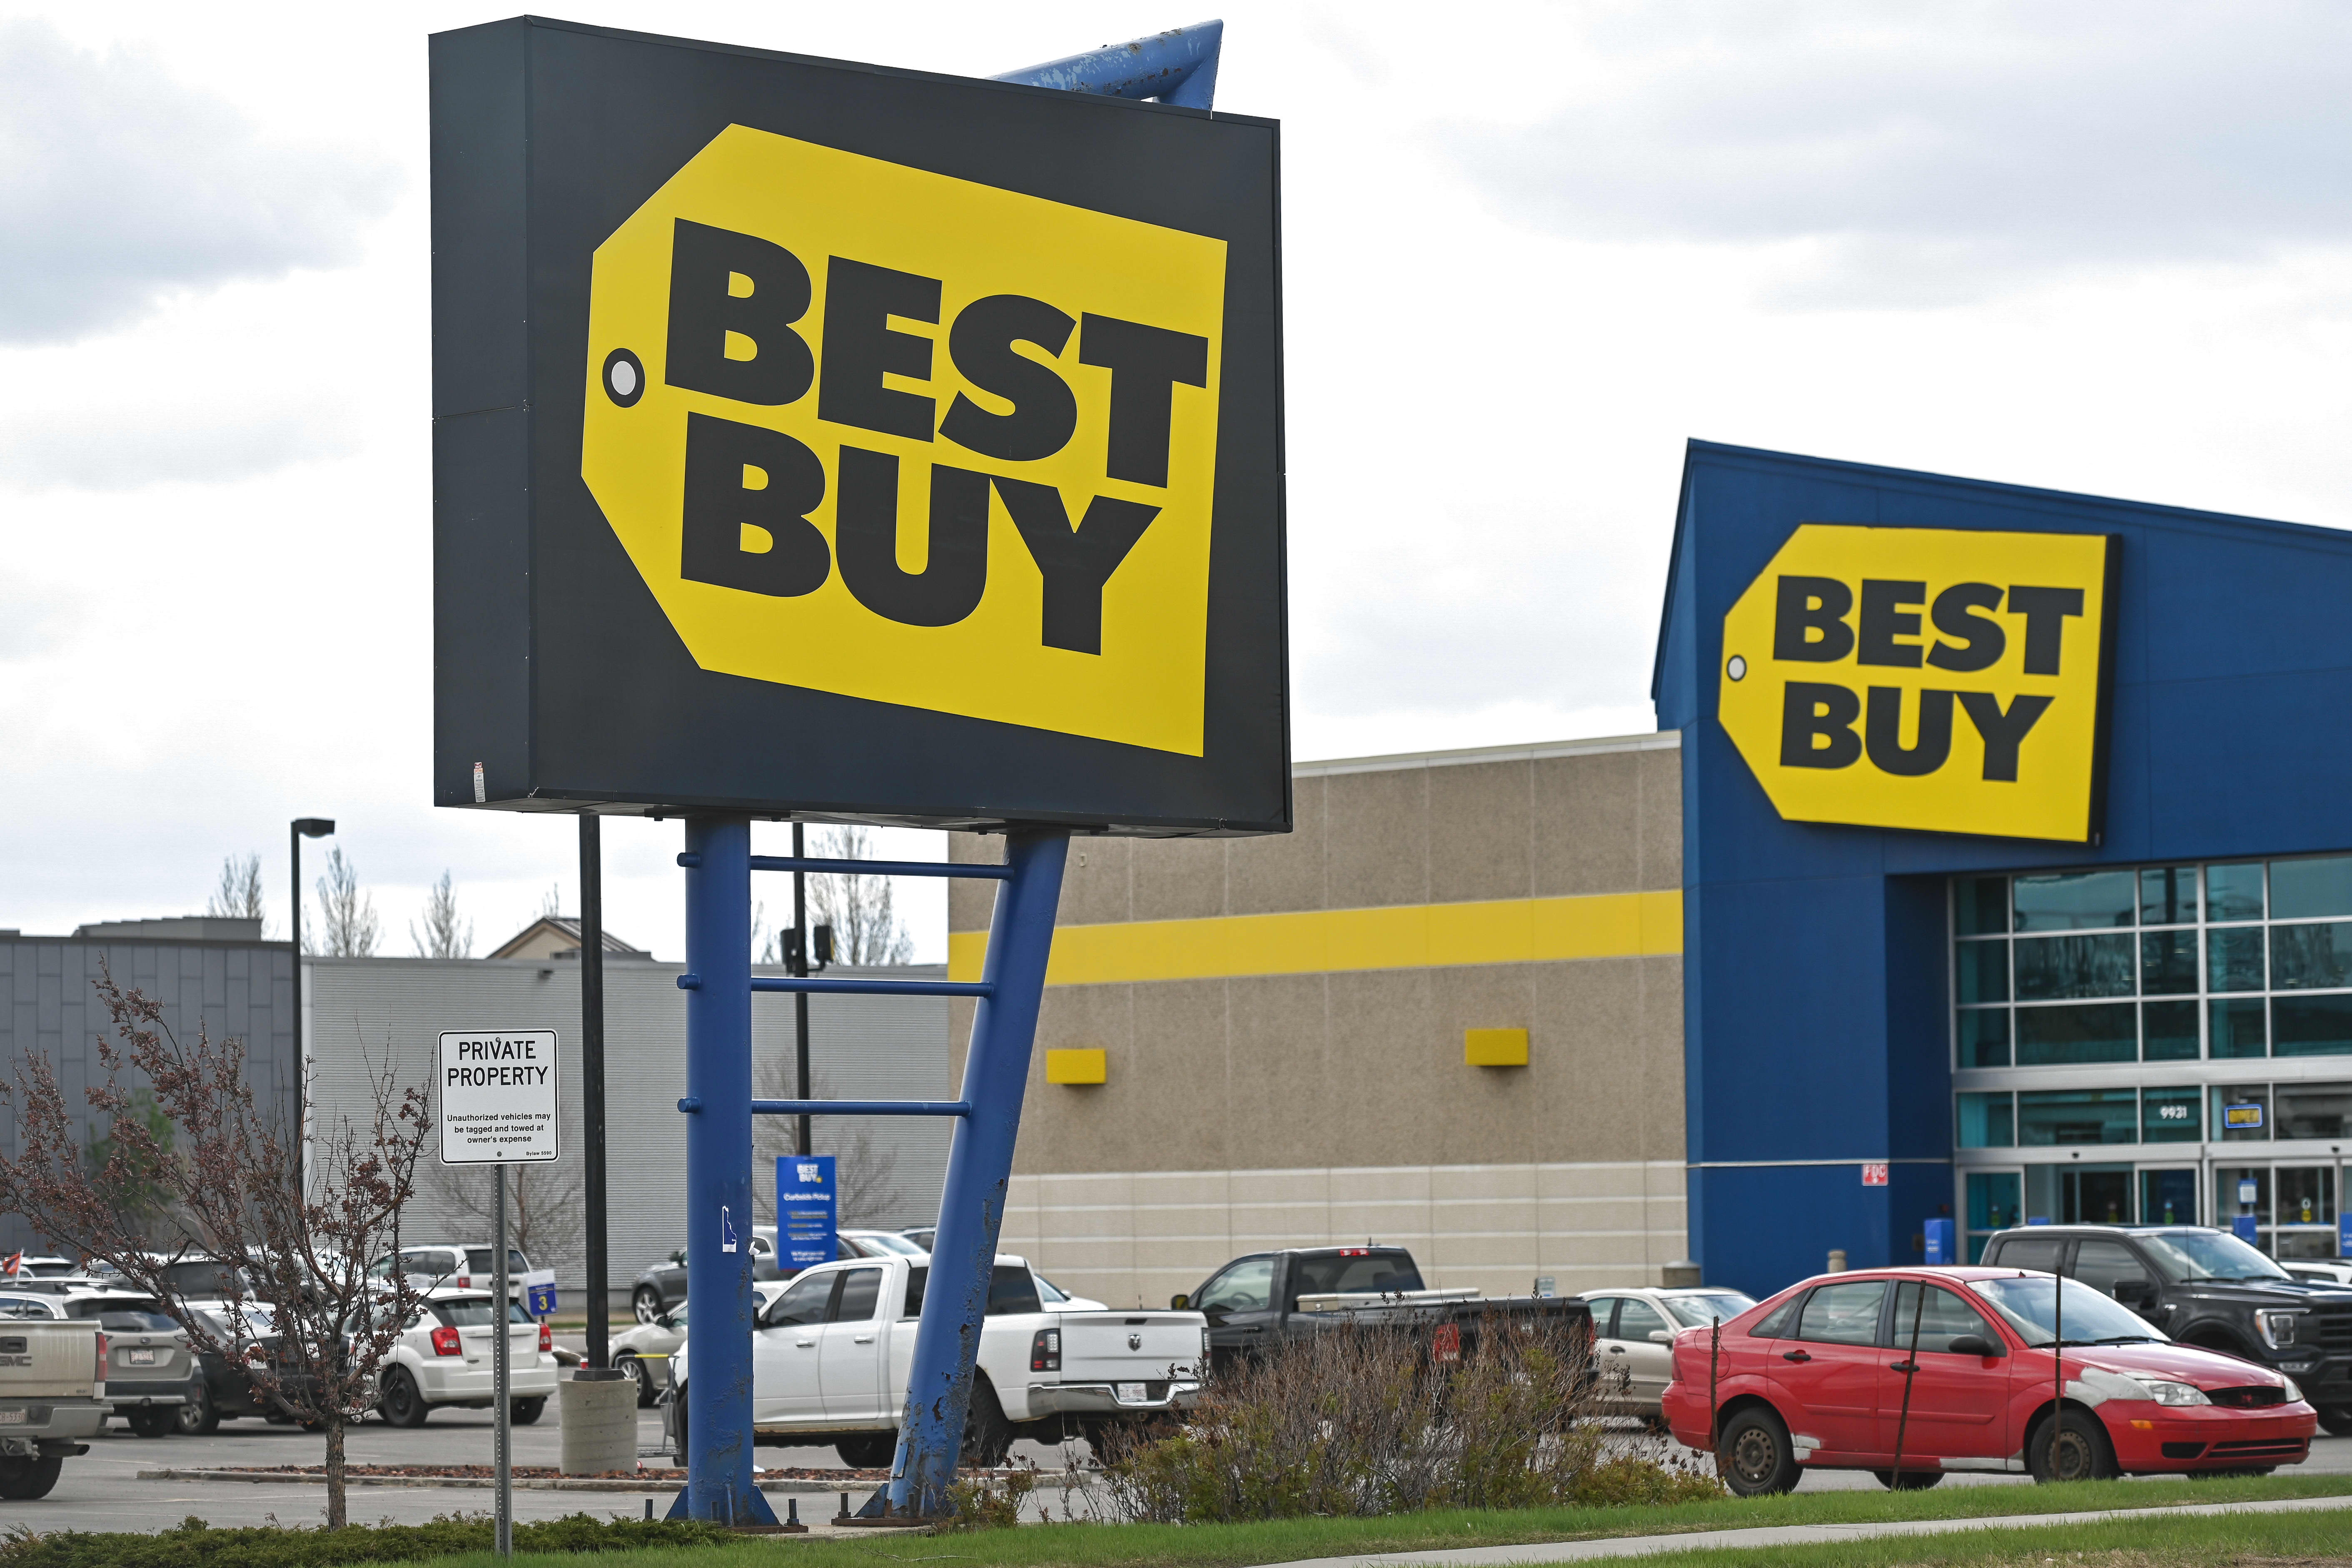 How to Get the Best Buy Student Discount